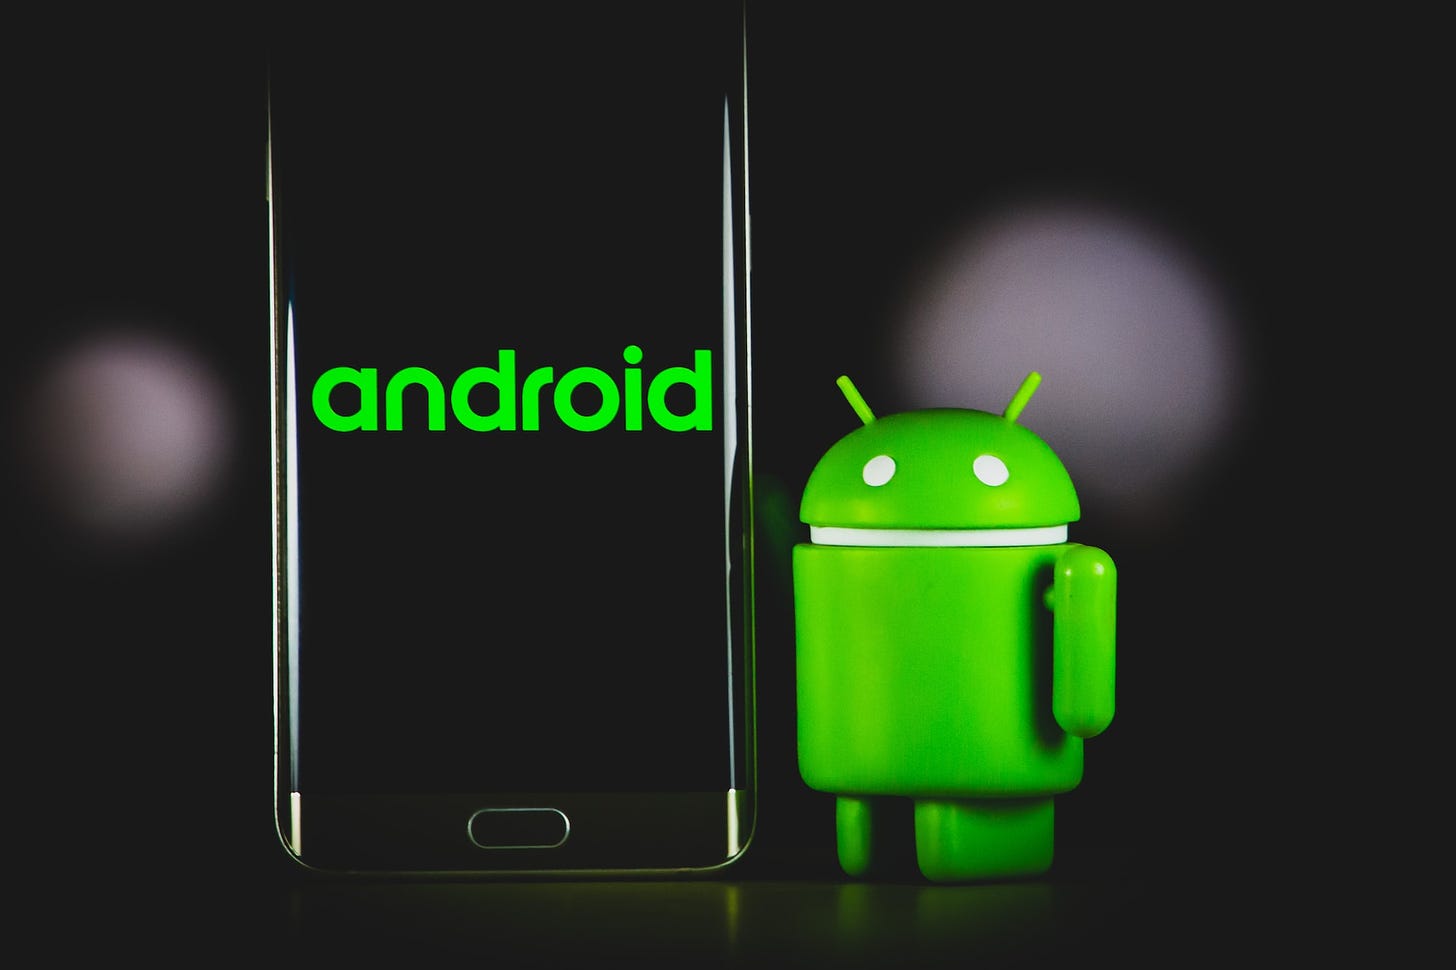 Bugdroid with an Android smartphone